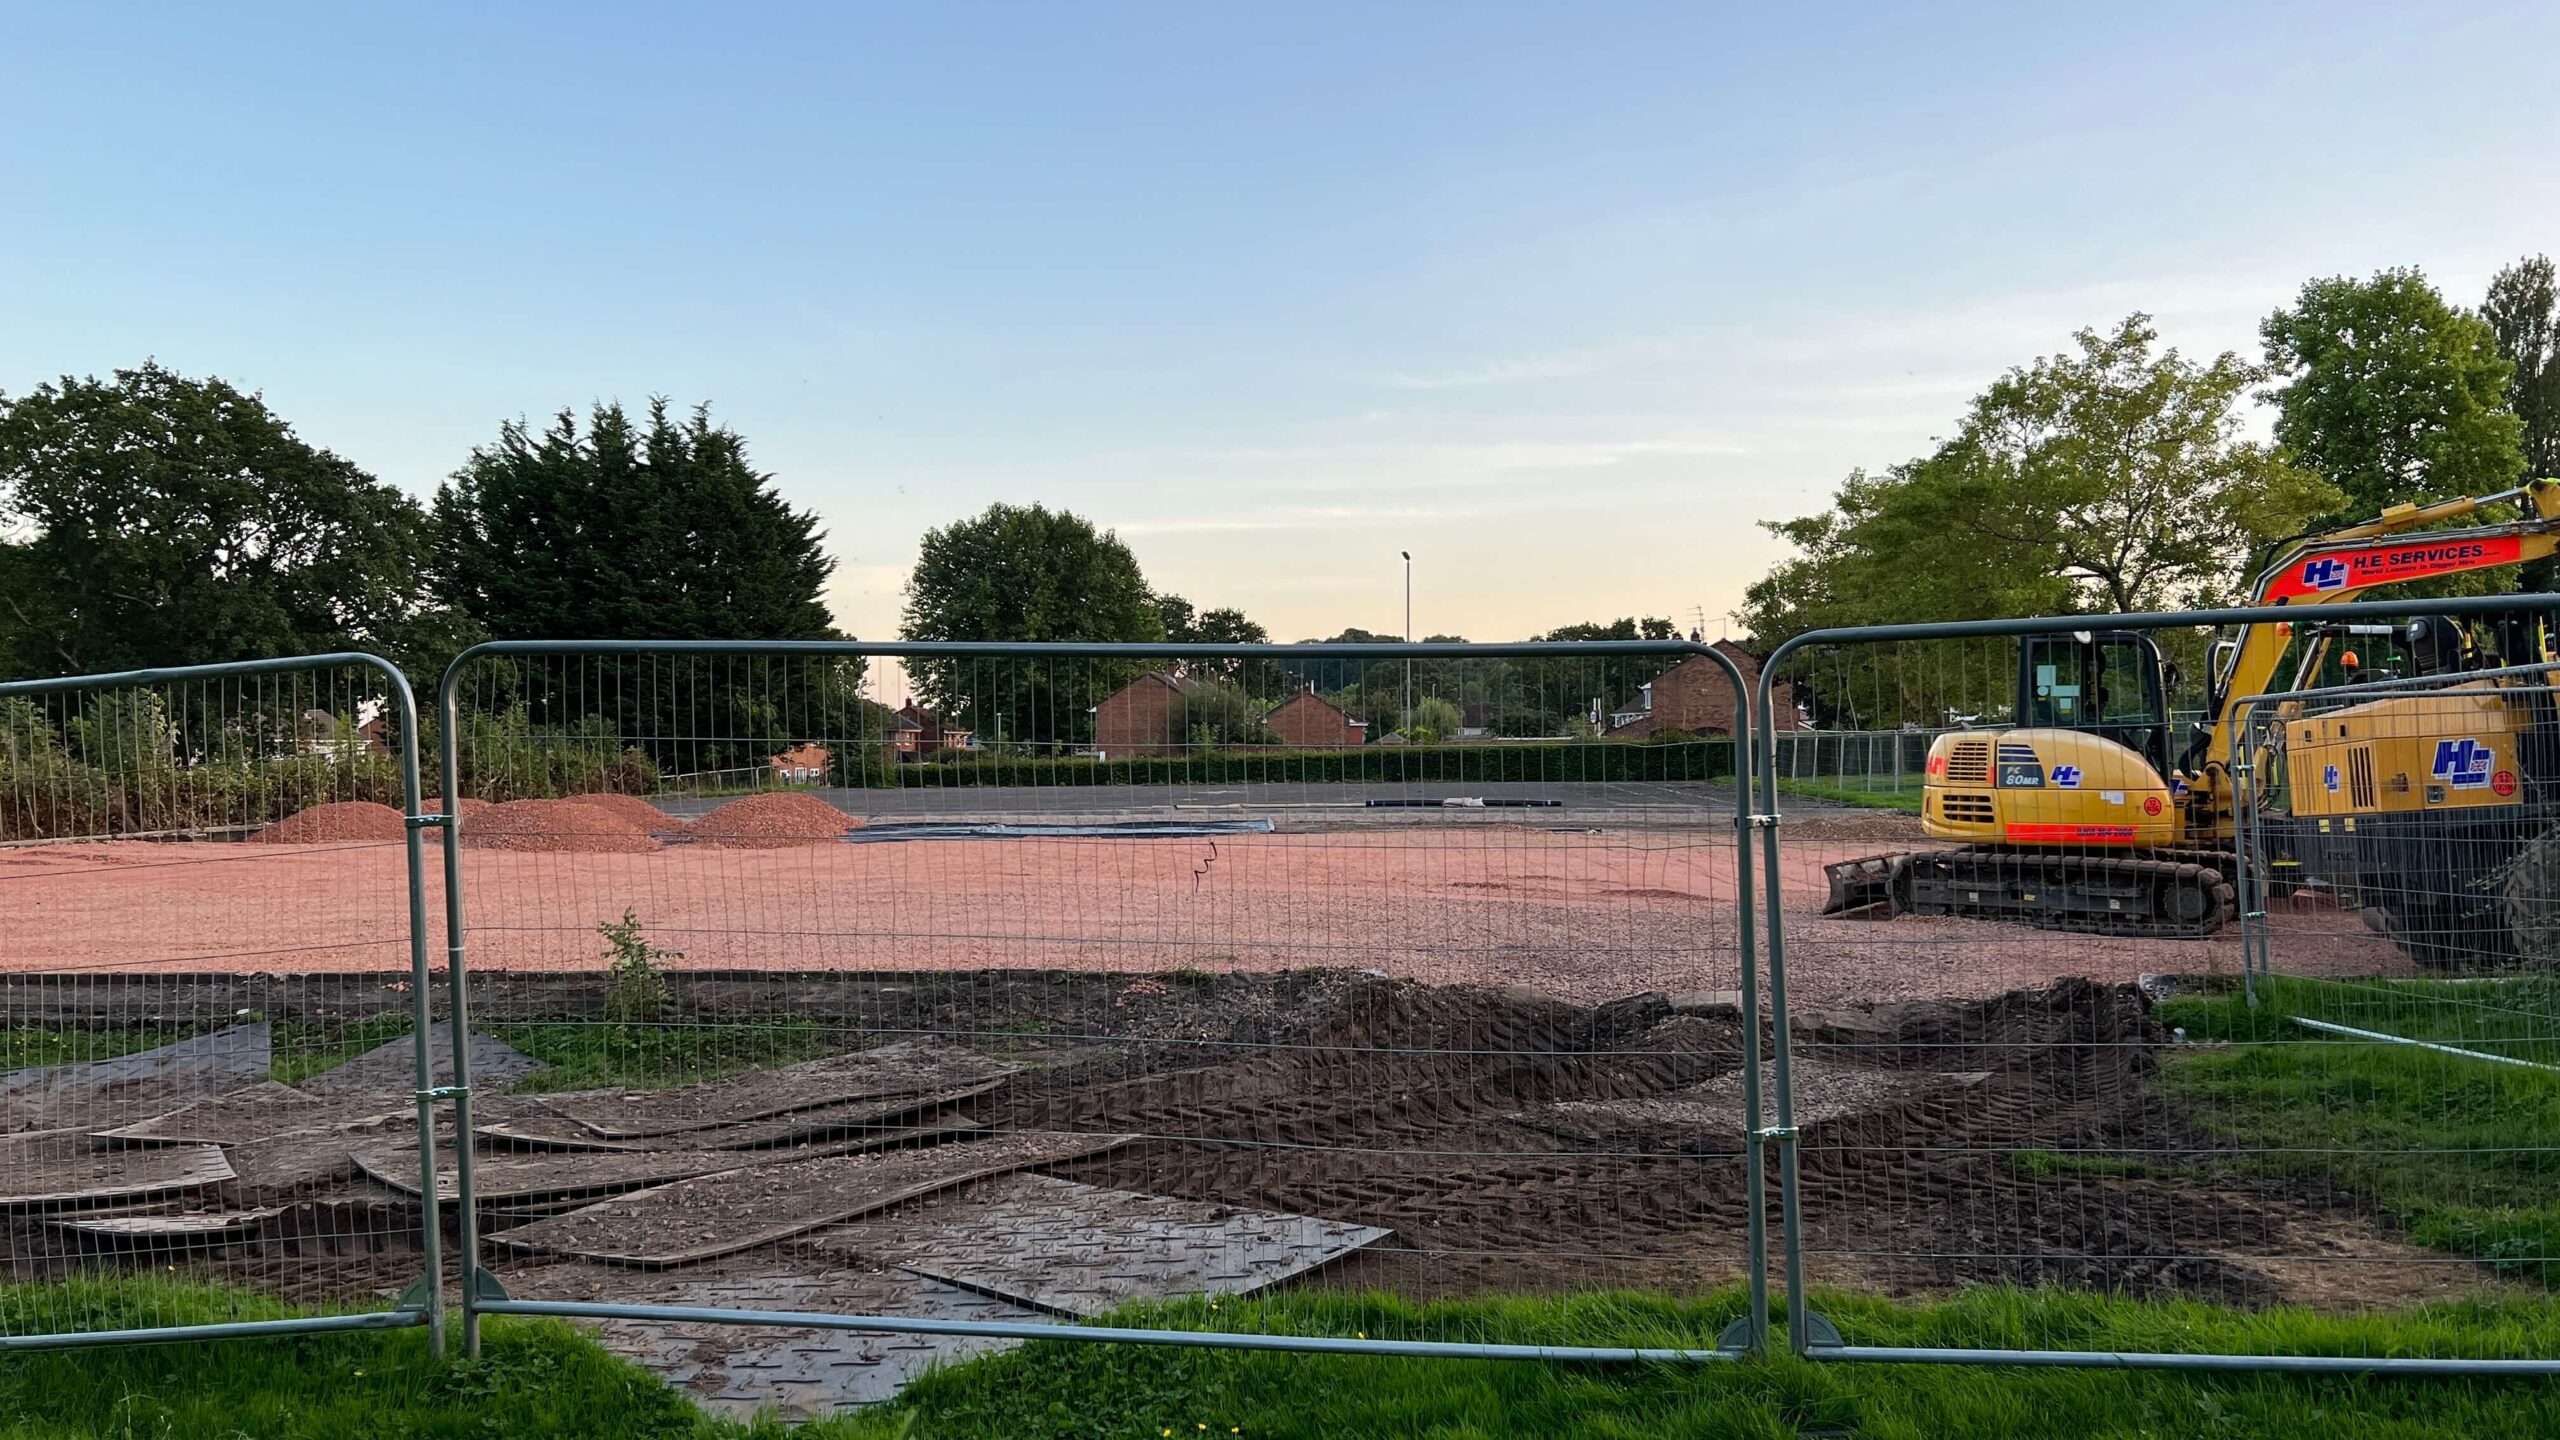 work taking place on tennis courts